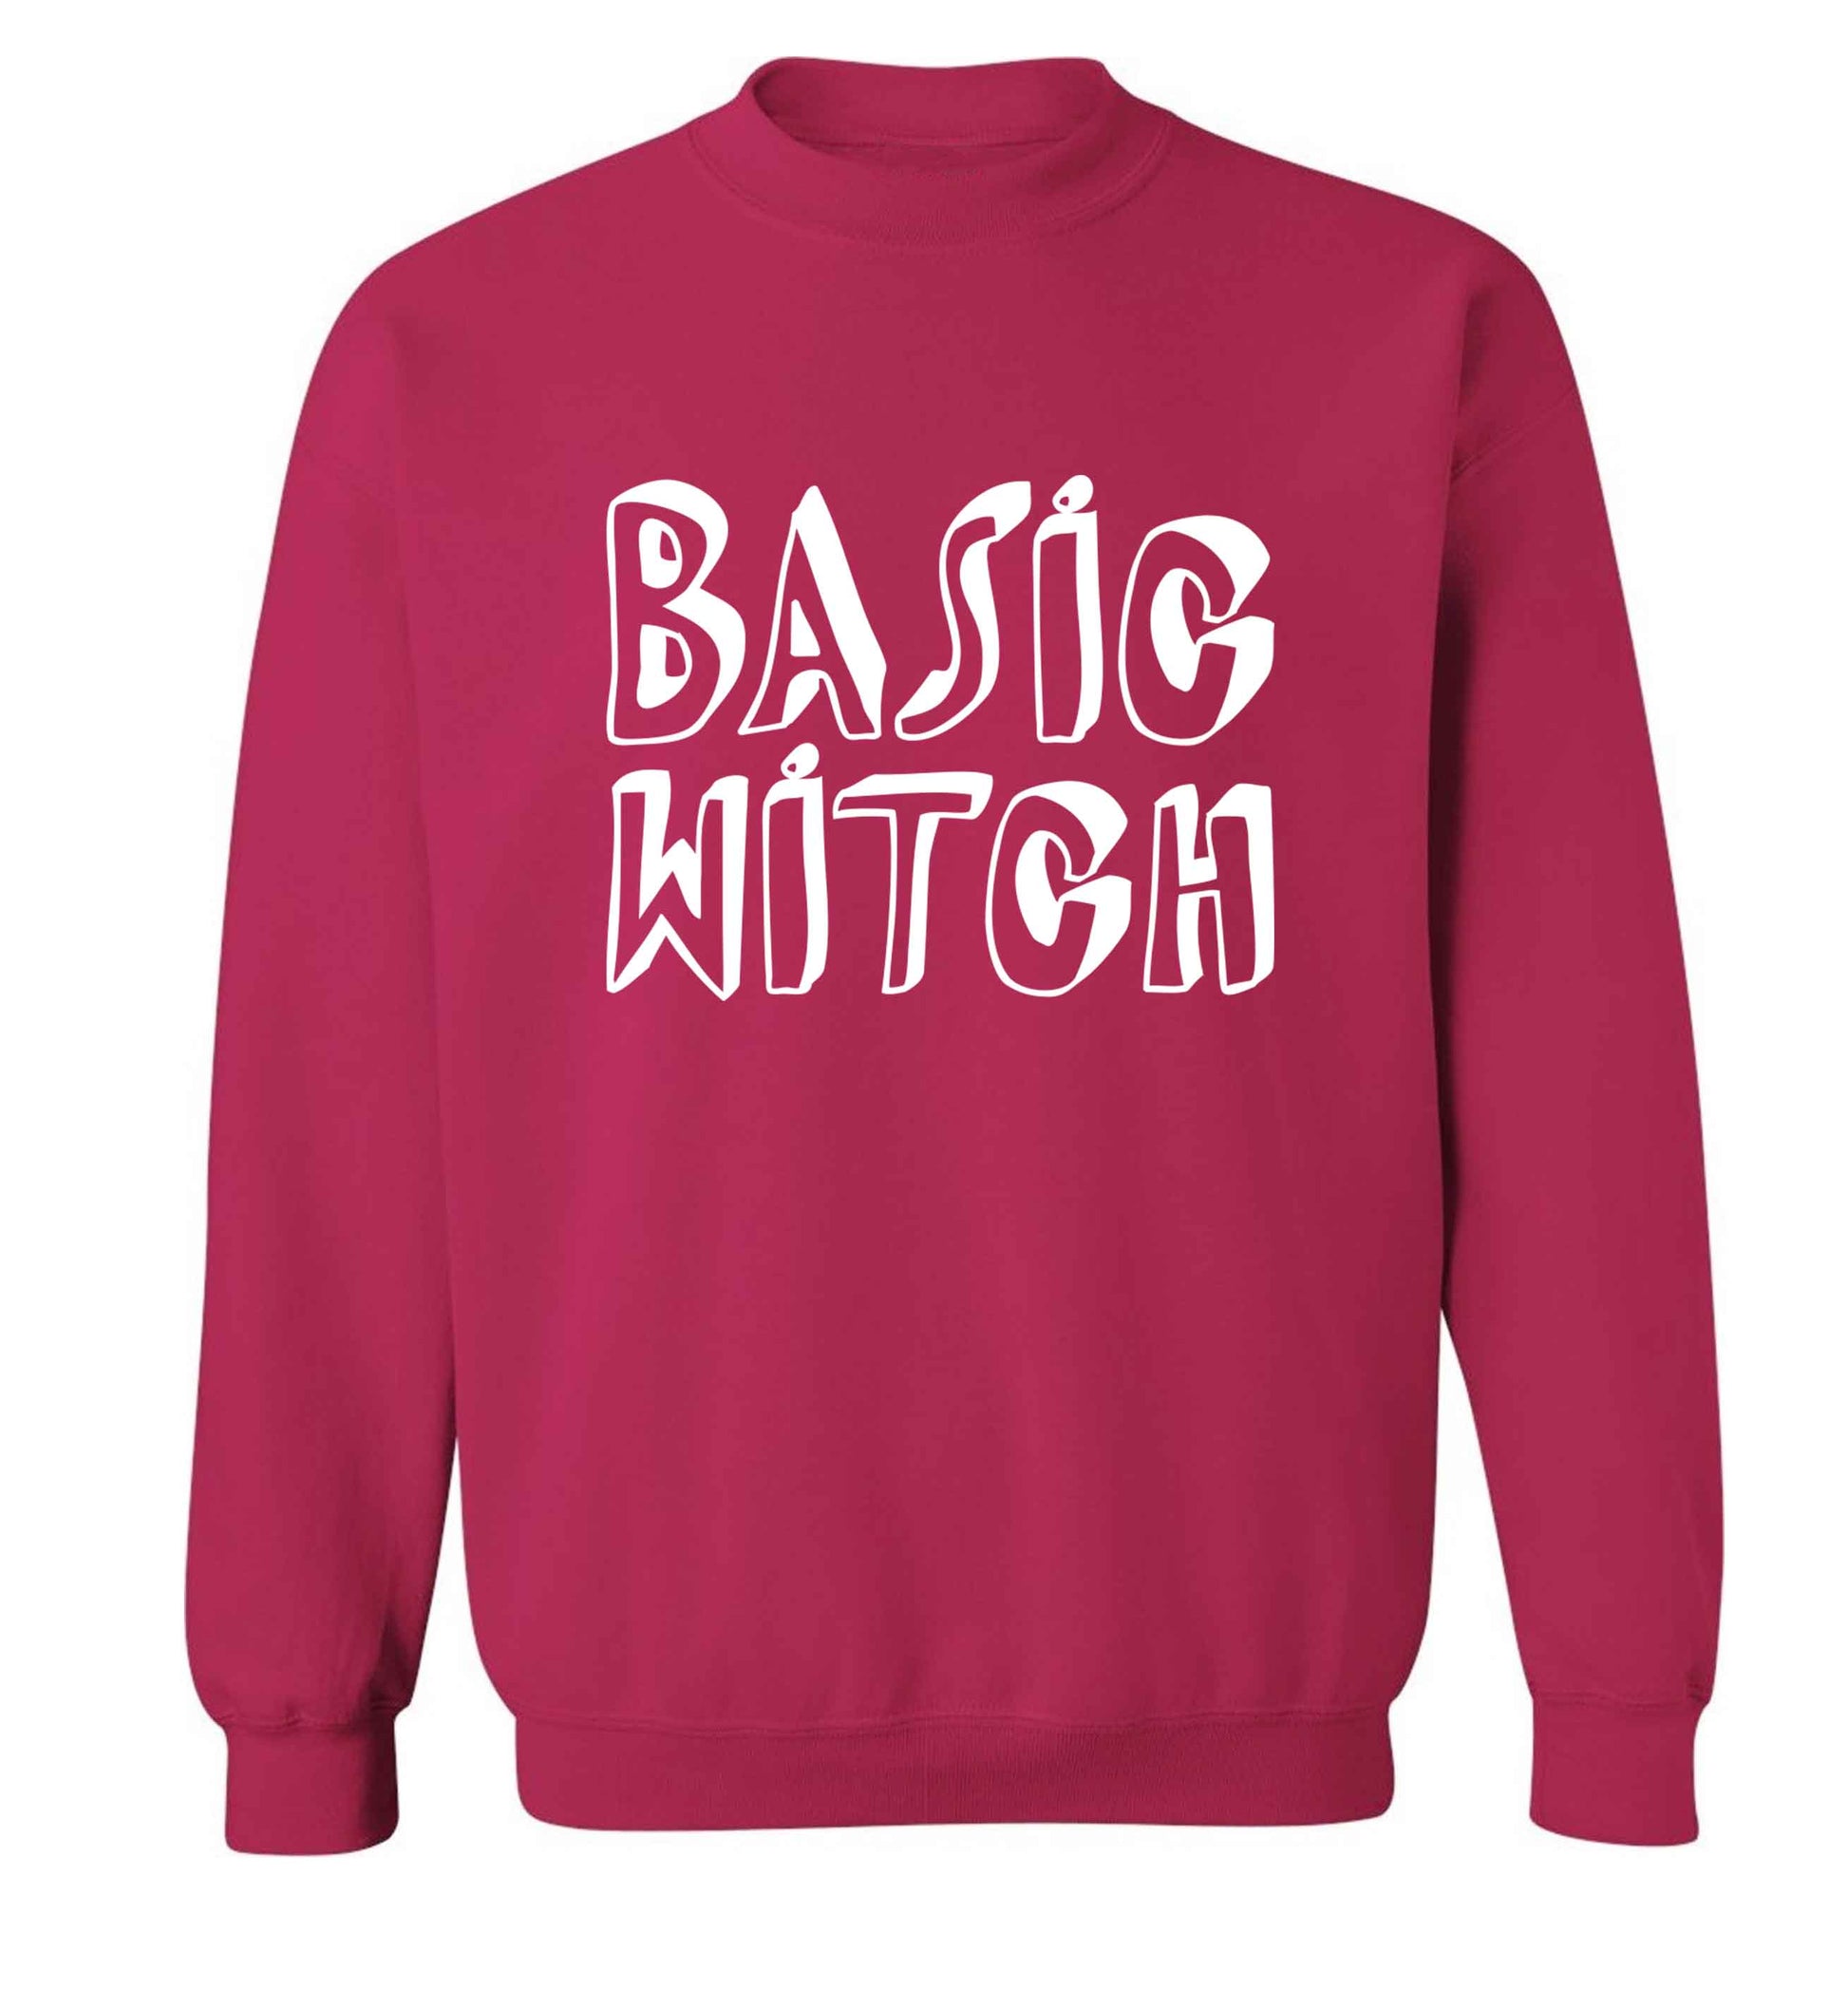 Basic witch adult's unisex pink sweater 2XL